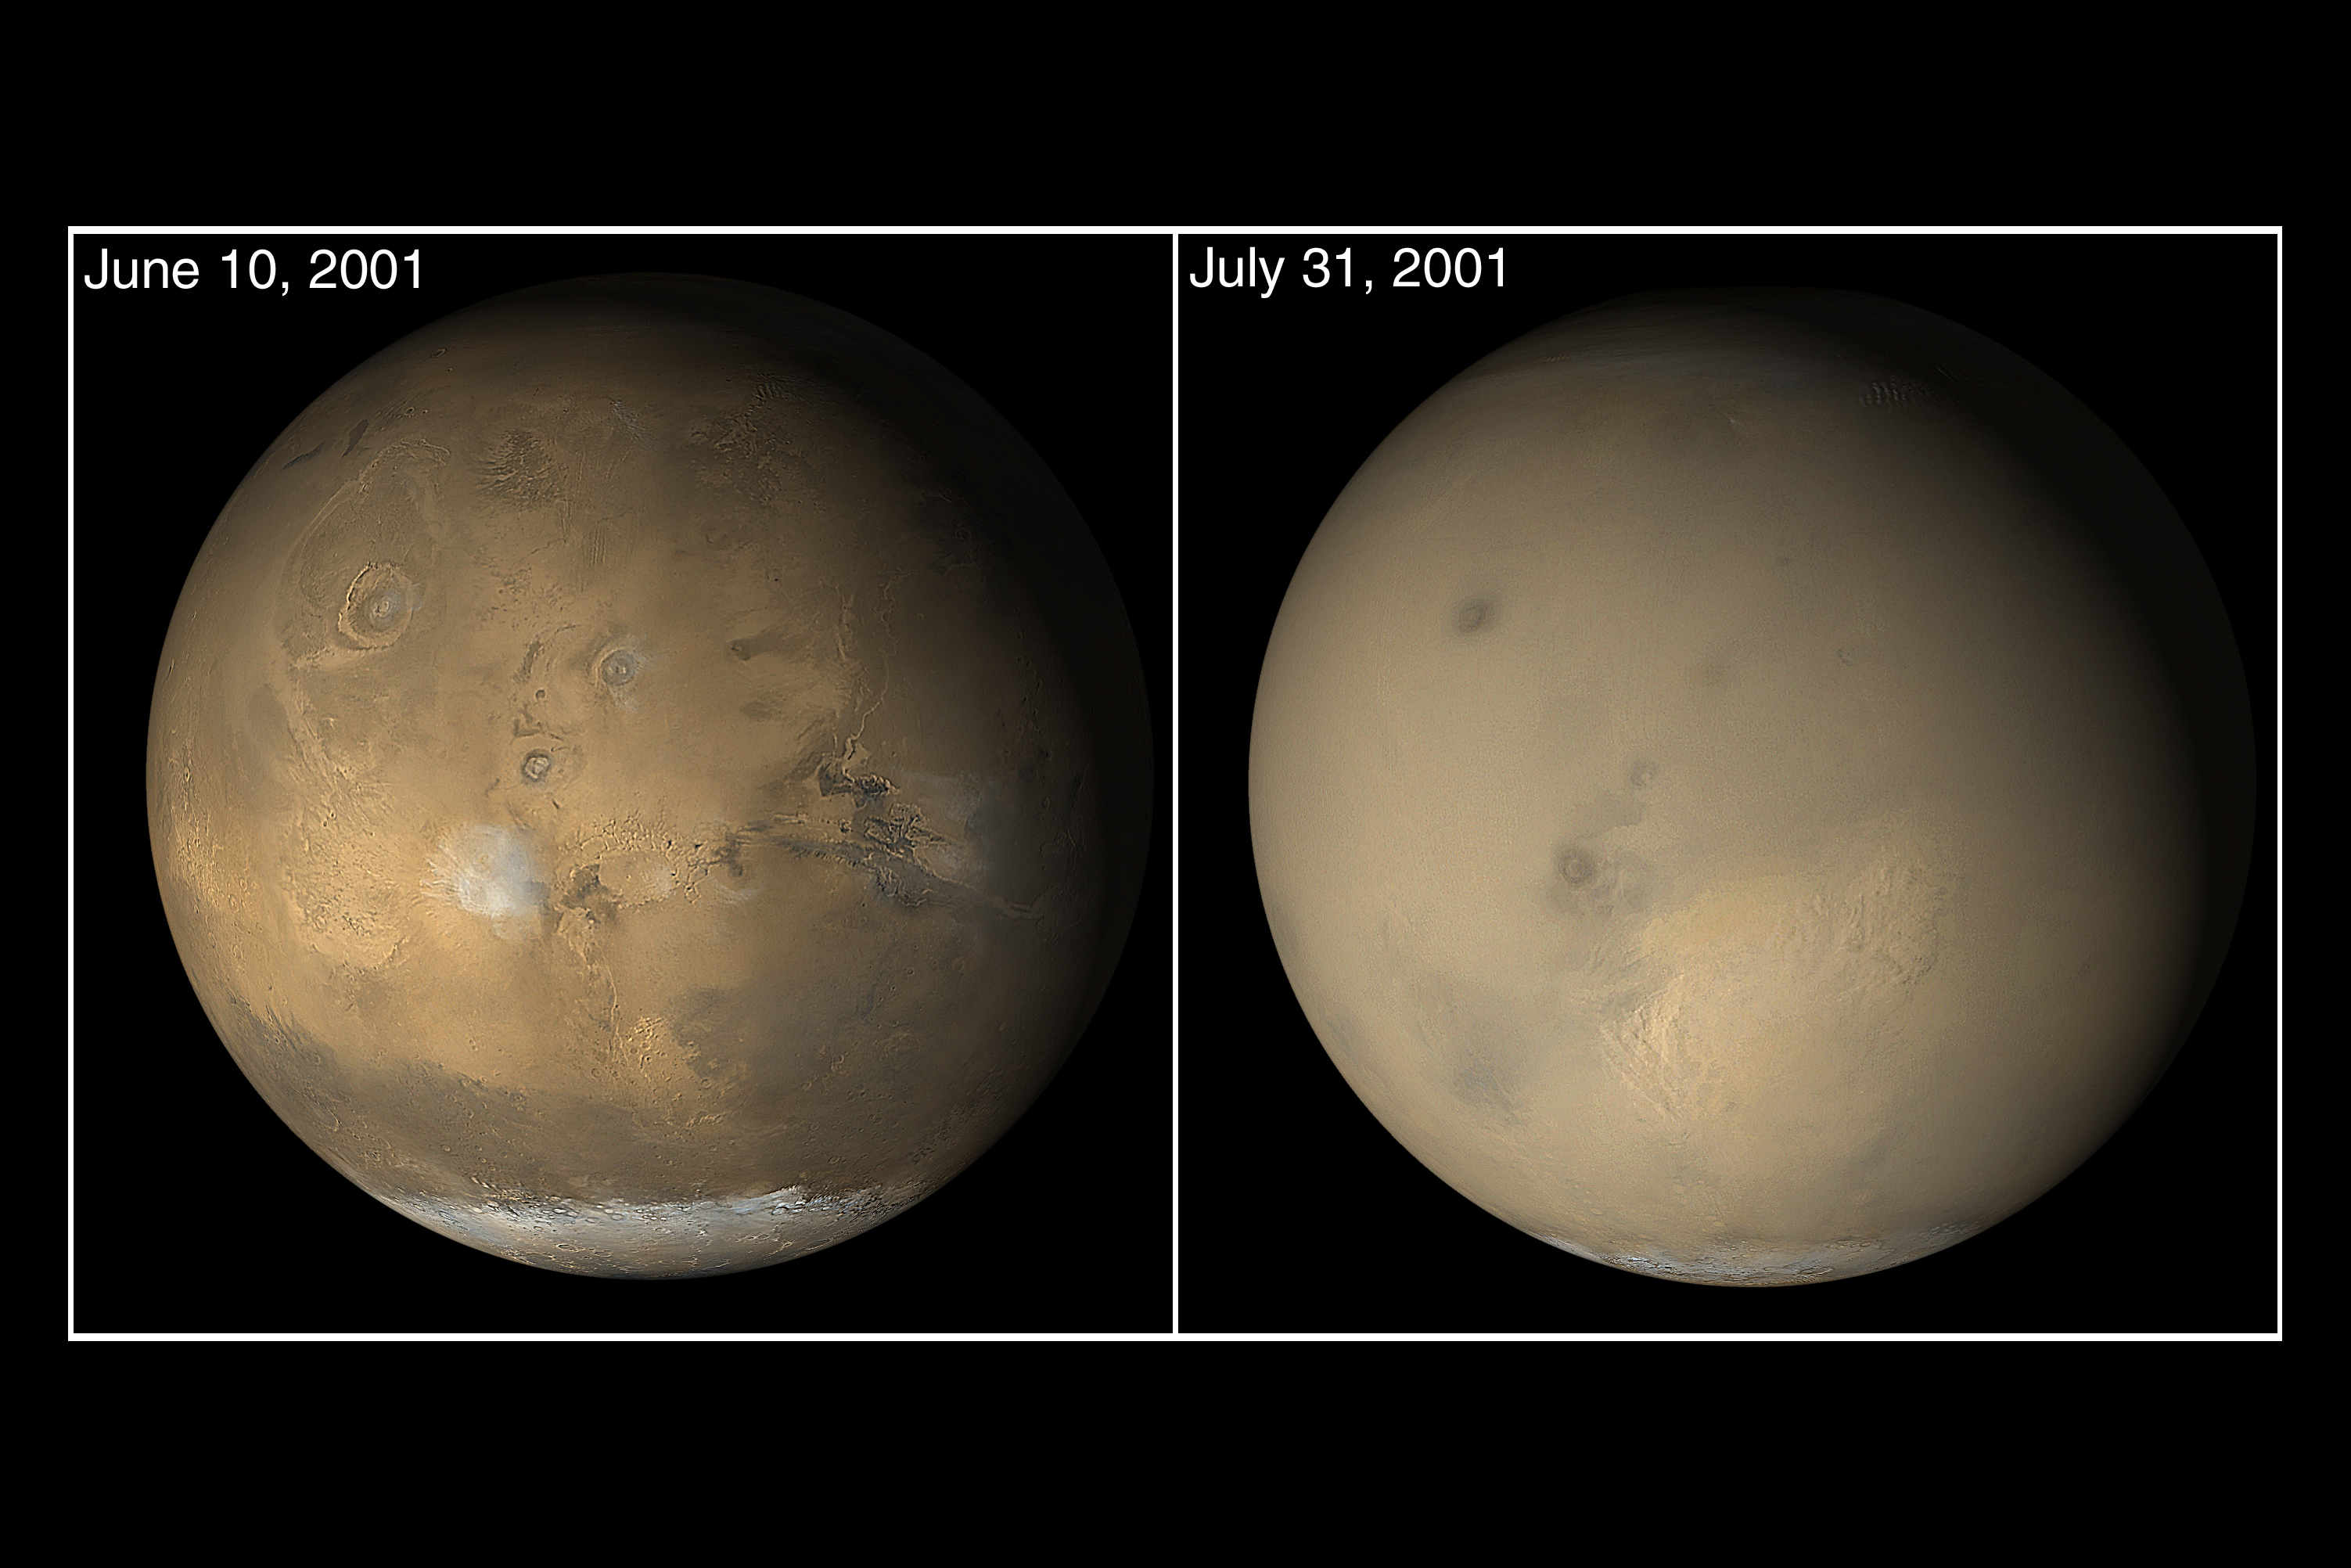 Late in June 2001, as southern winter transitioned to spring, the Mars Orbital Camera (MOC) system on Mars Global Surveyor (MGS) captured the moment that dust storms began to envelop parts of the southern hemisphere.